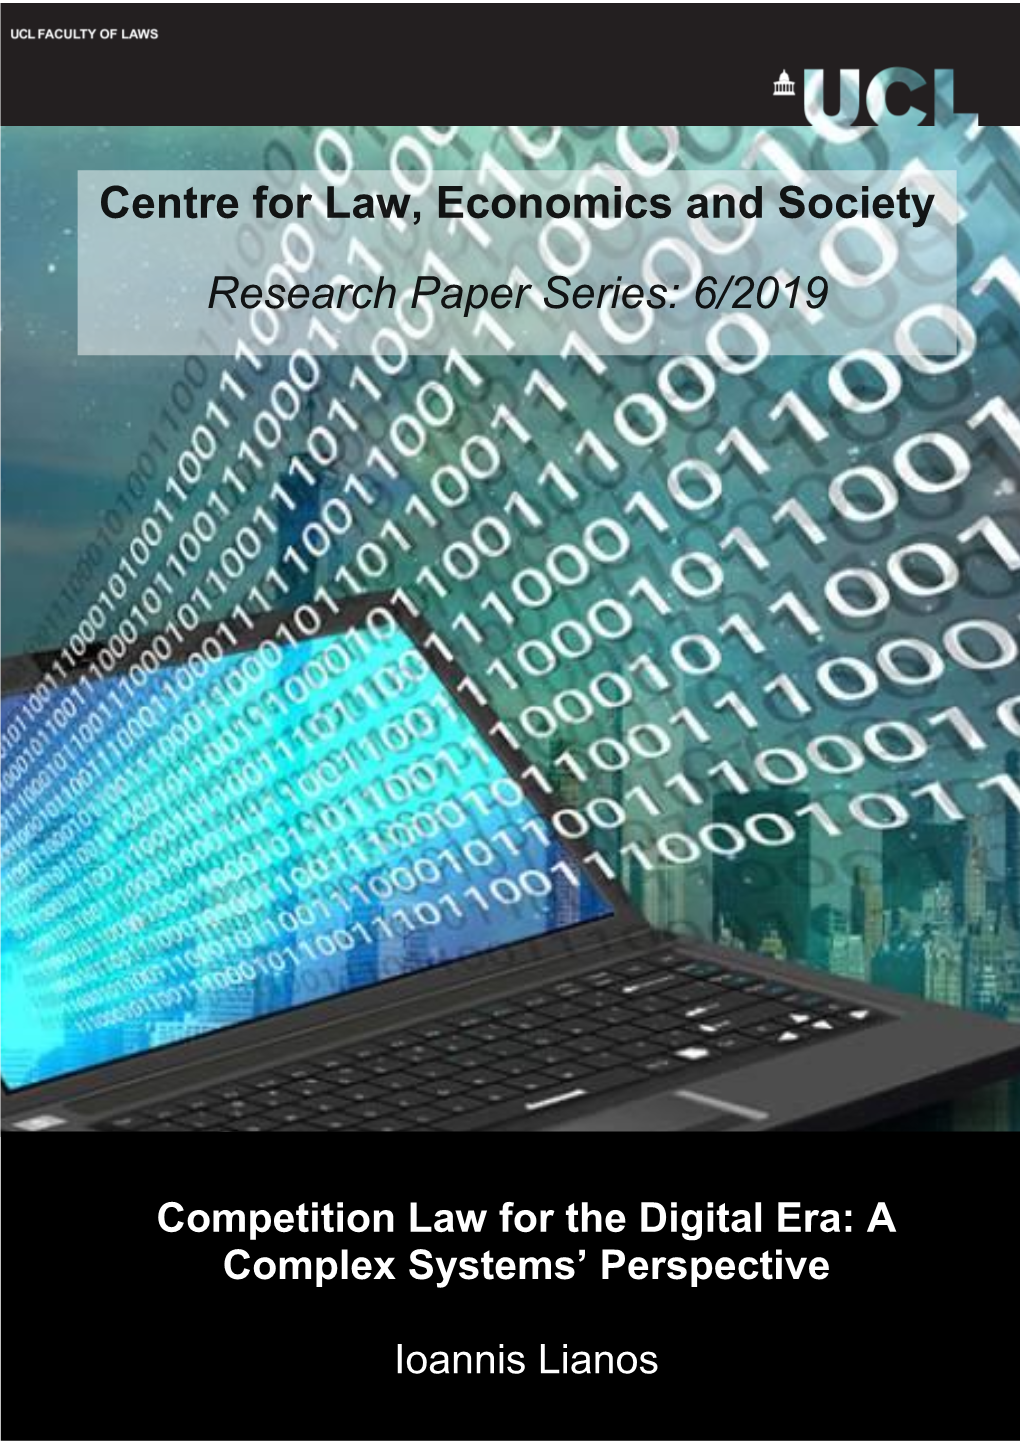 Competition Law for the Digital Era: a Complex Systems' Perspective